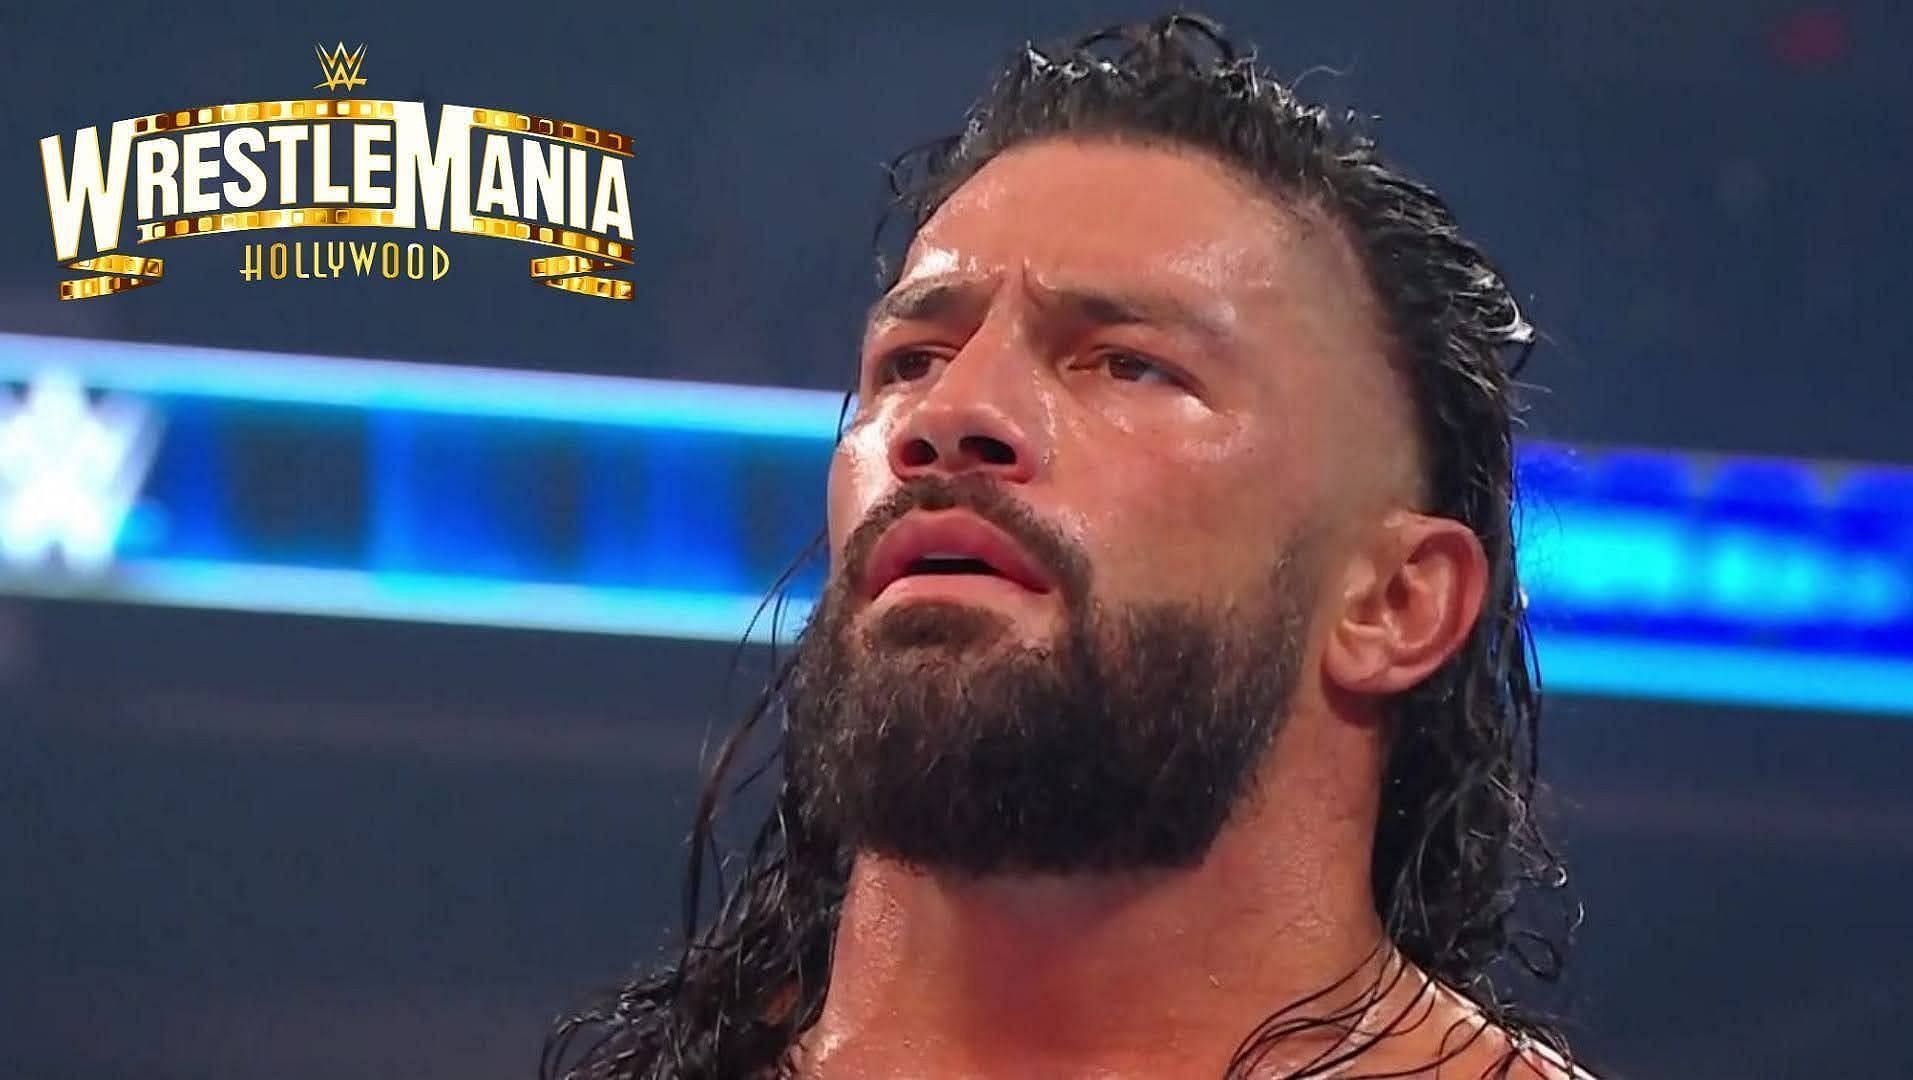 Roman Reigns could defeat Cody Rhodes at WrestleMania